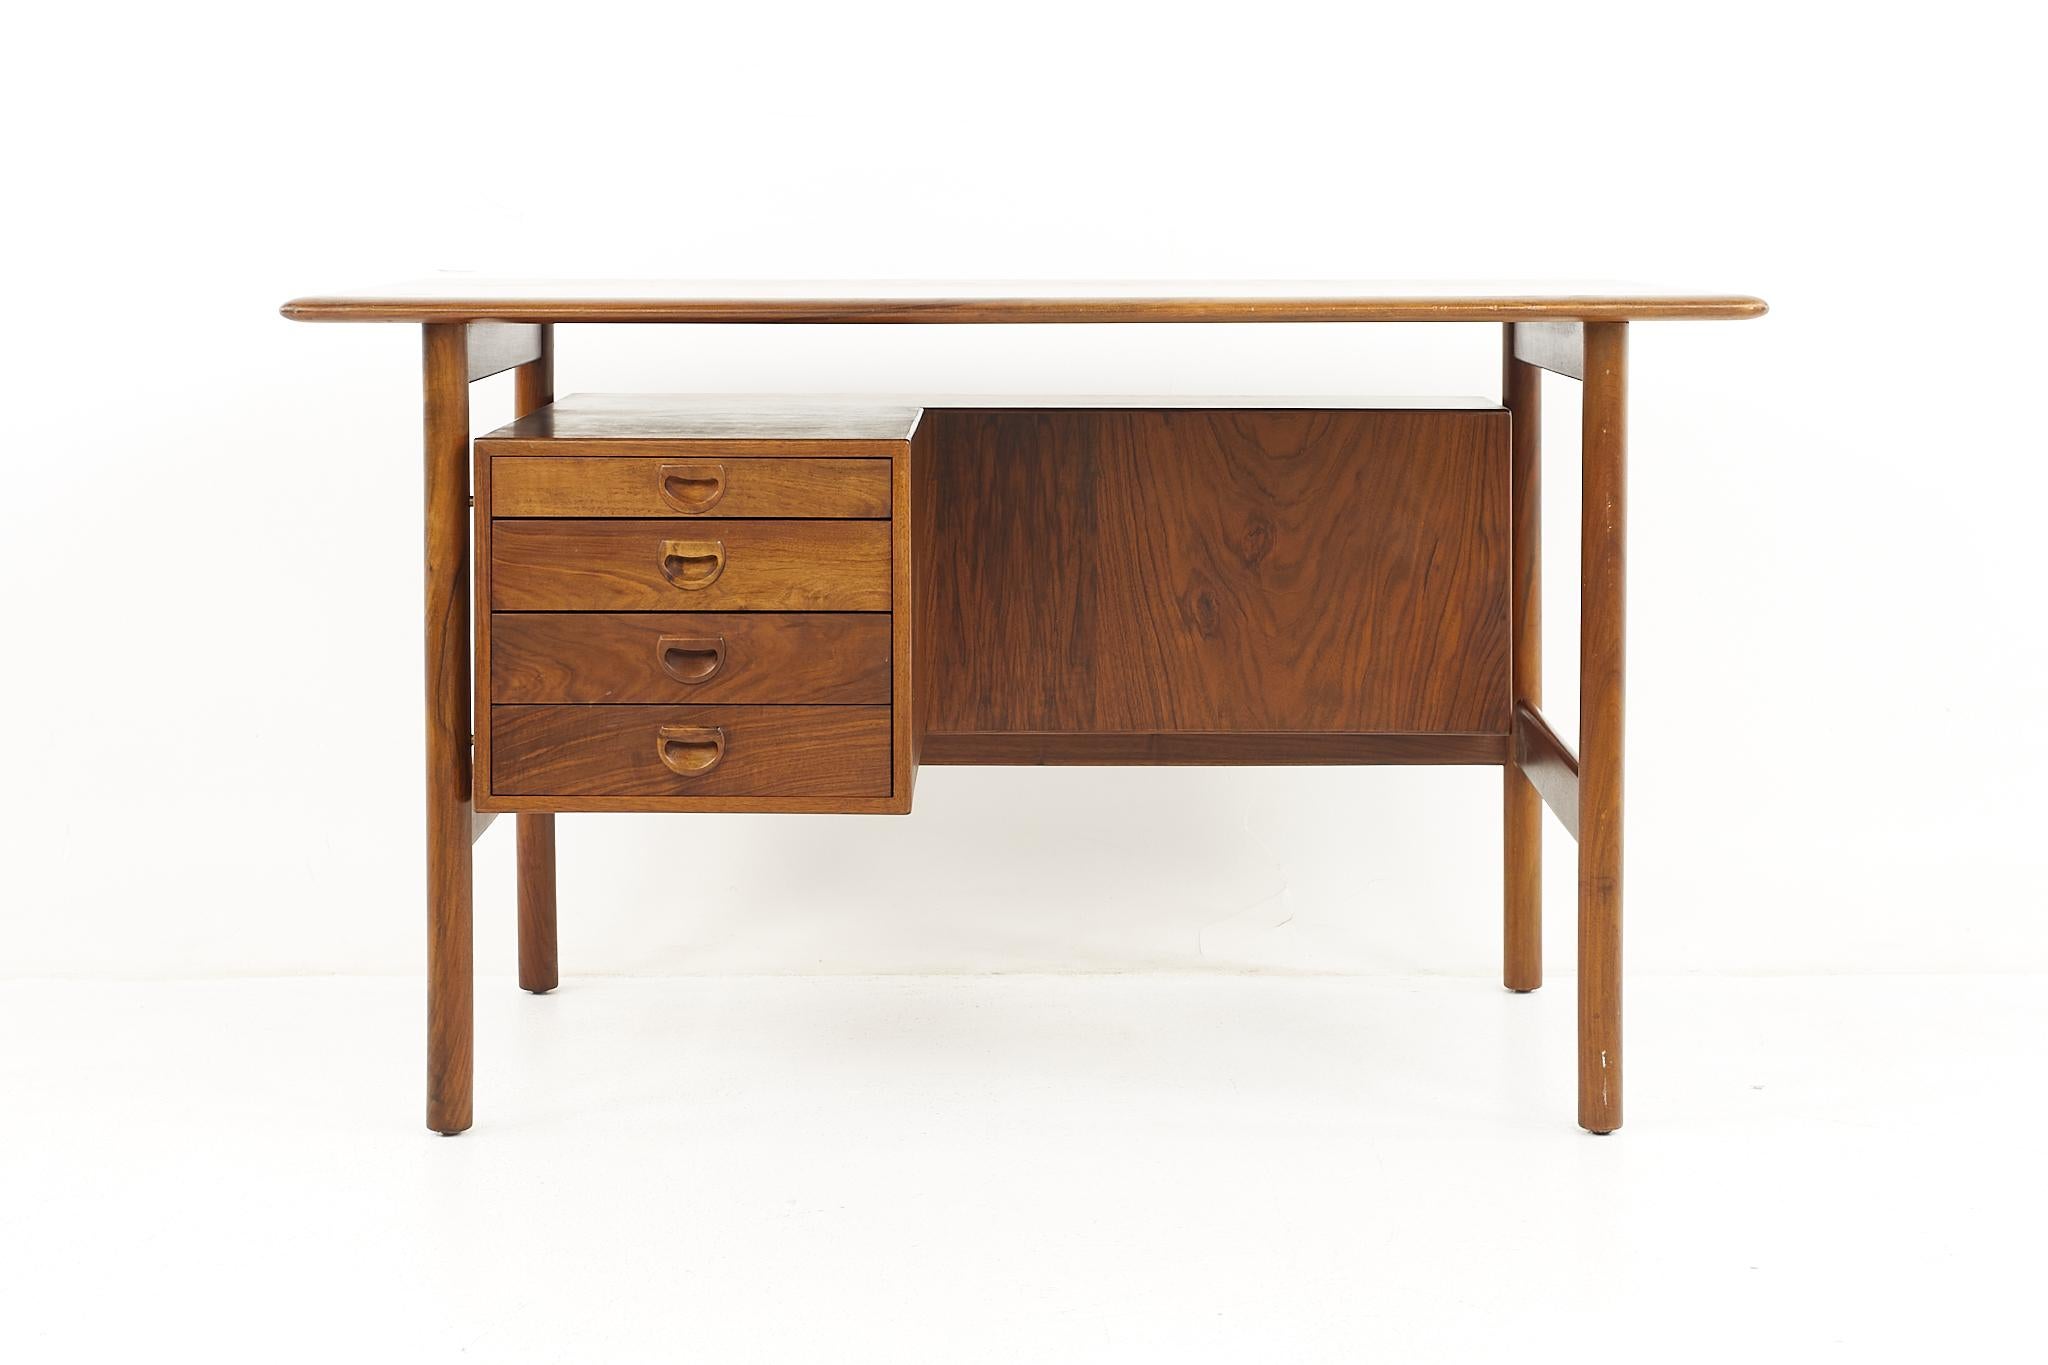 Hans Andersen Mid Century Danish Rosewood Desk

The desk measures: 49.25 wide x 25.5 deep x 28.25 high, with a chair clearance of 27 inches 

All pieces of furniture can be had in what we call restored vintage condition. That means the piece is